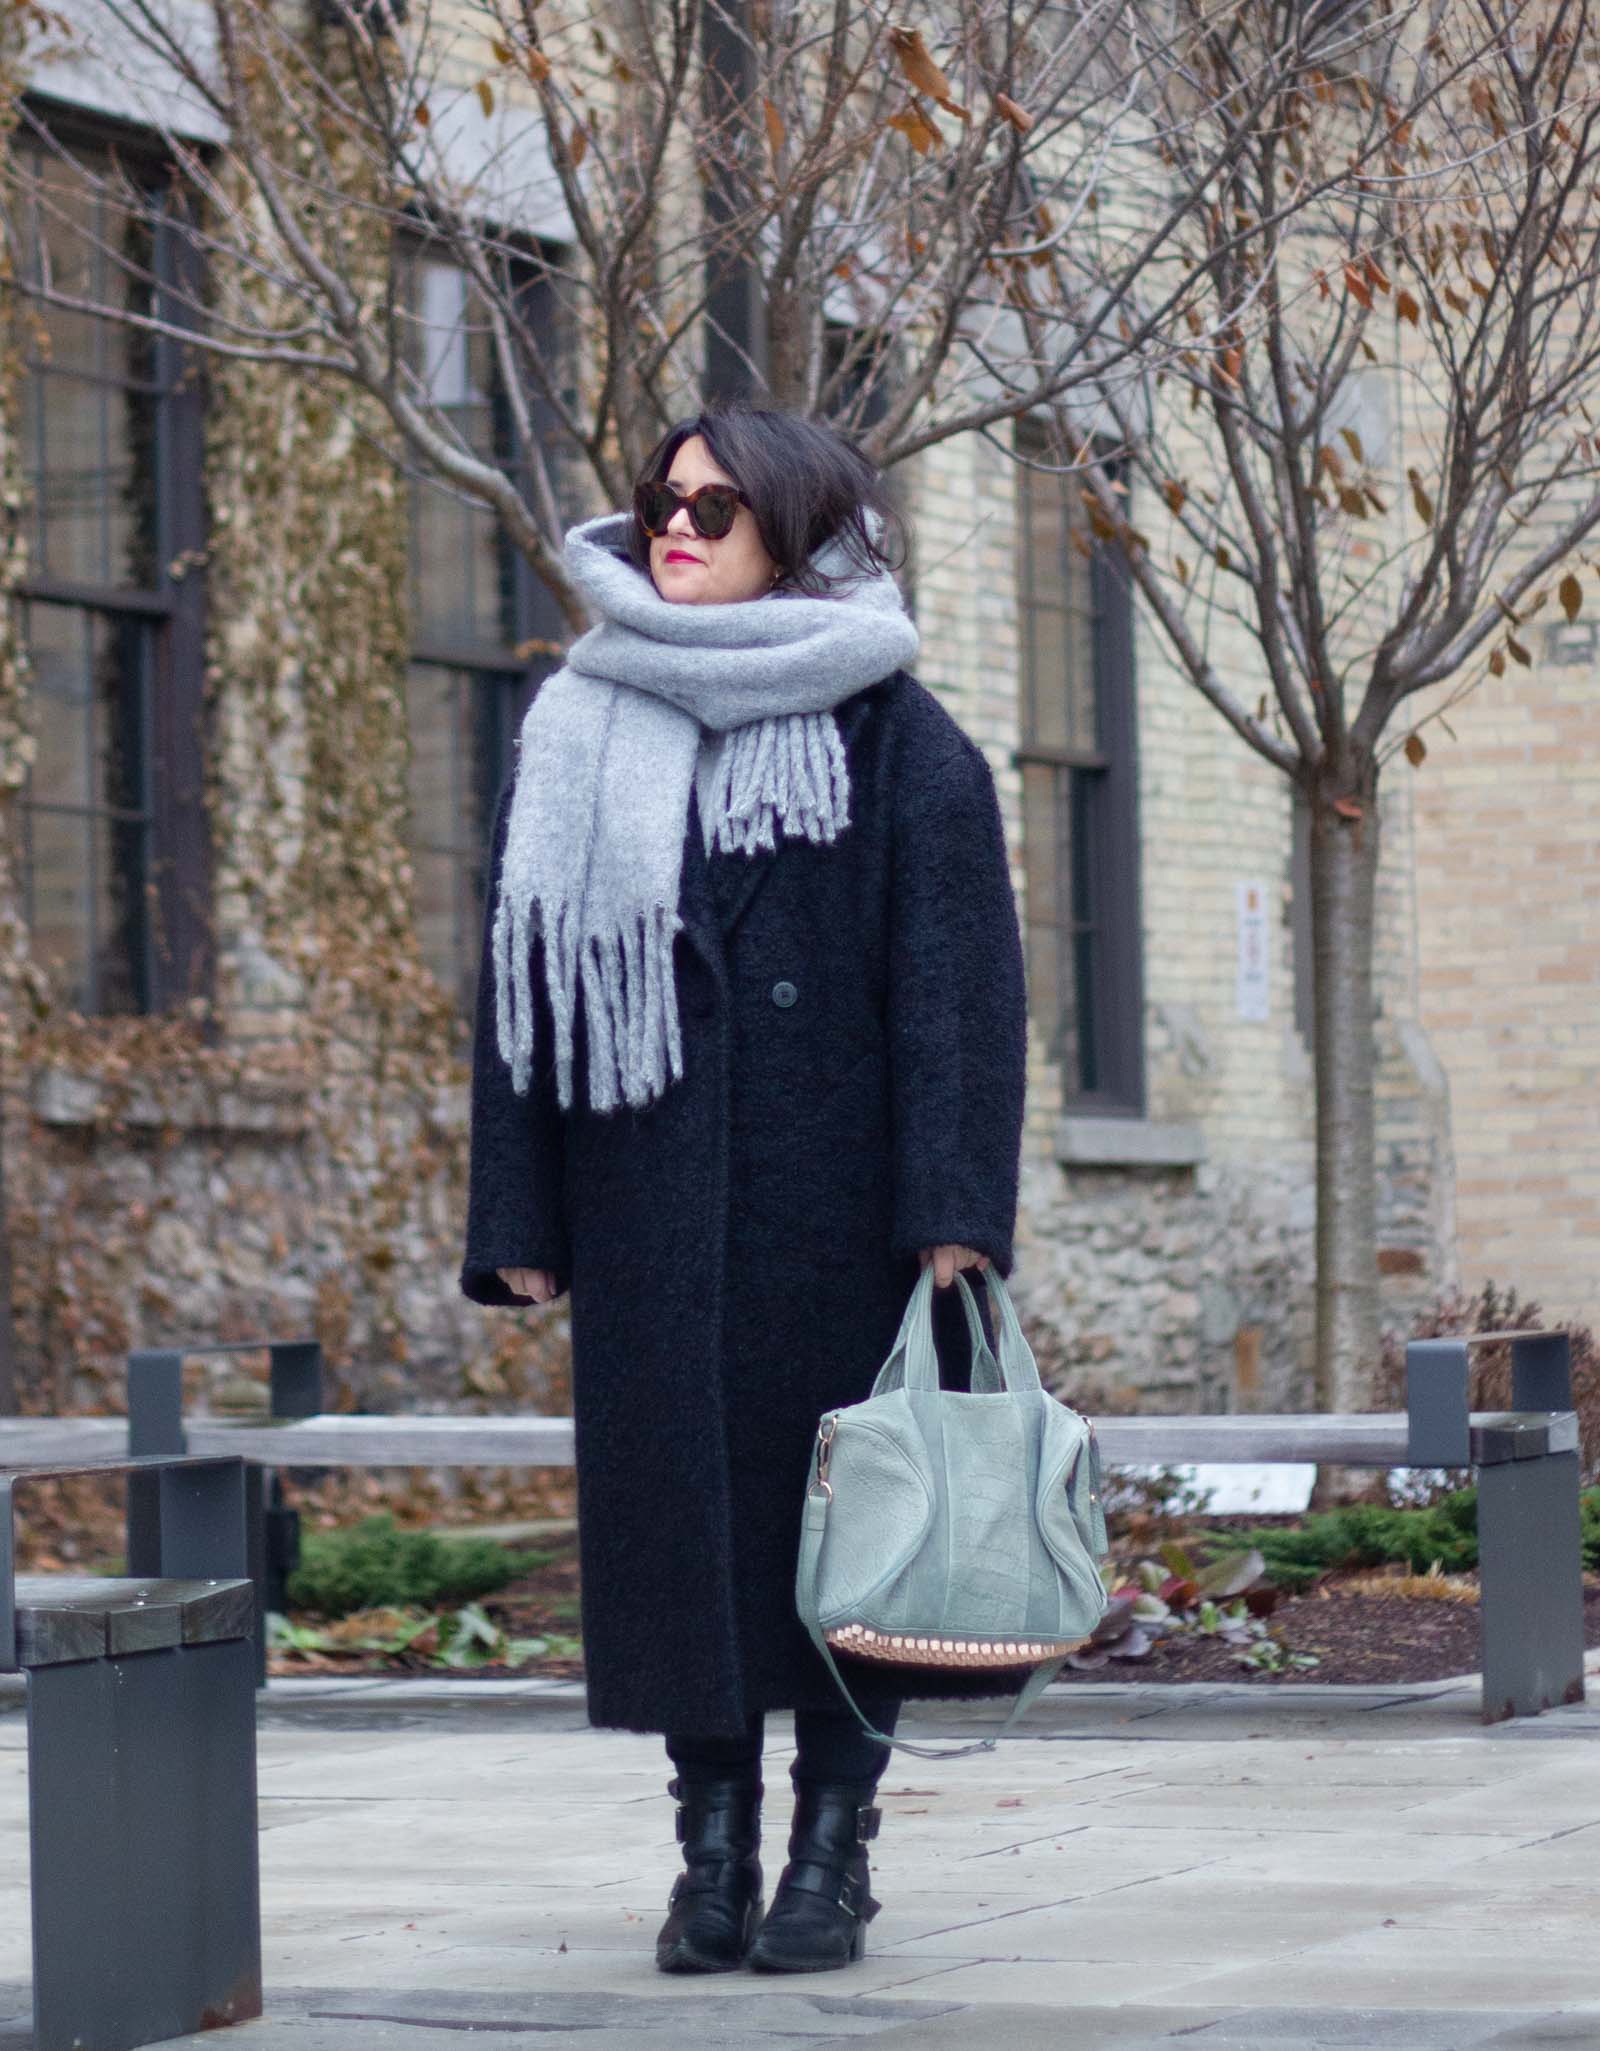 black and grey outfit, black coat with grey accessories